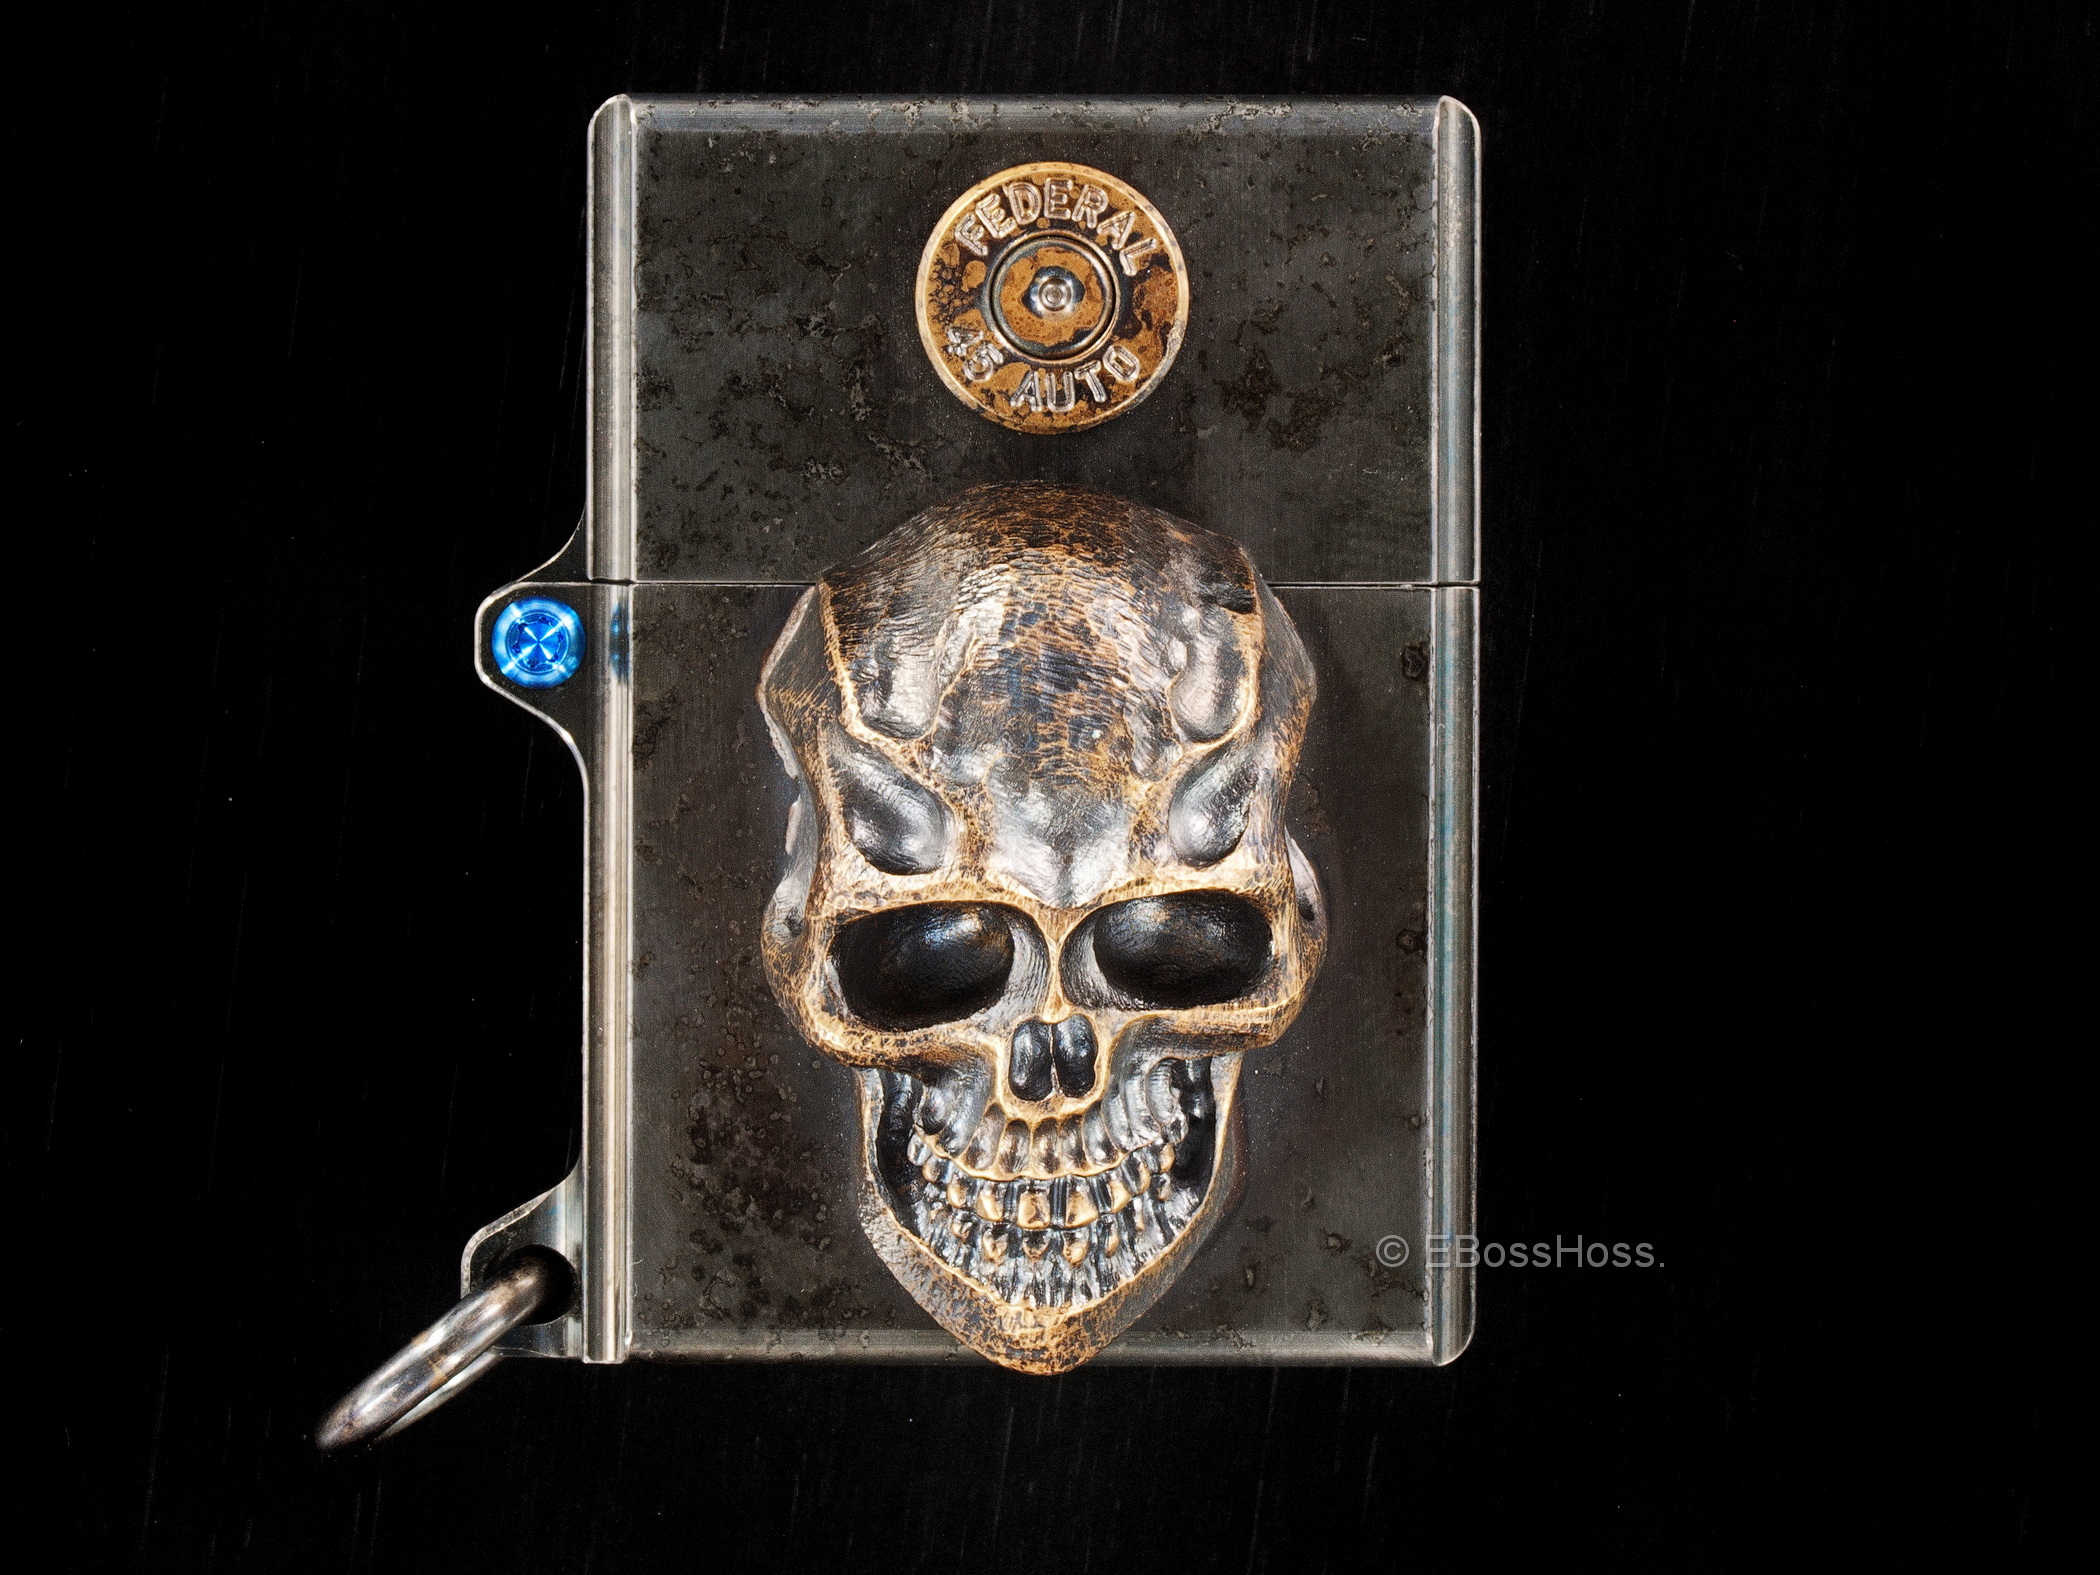 Obatake - Stee lFlame Custom 3-D Sledge Lighter - with XL Darkness Skull &amp; Federal 45